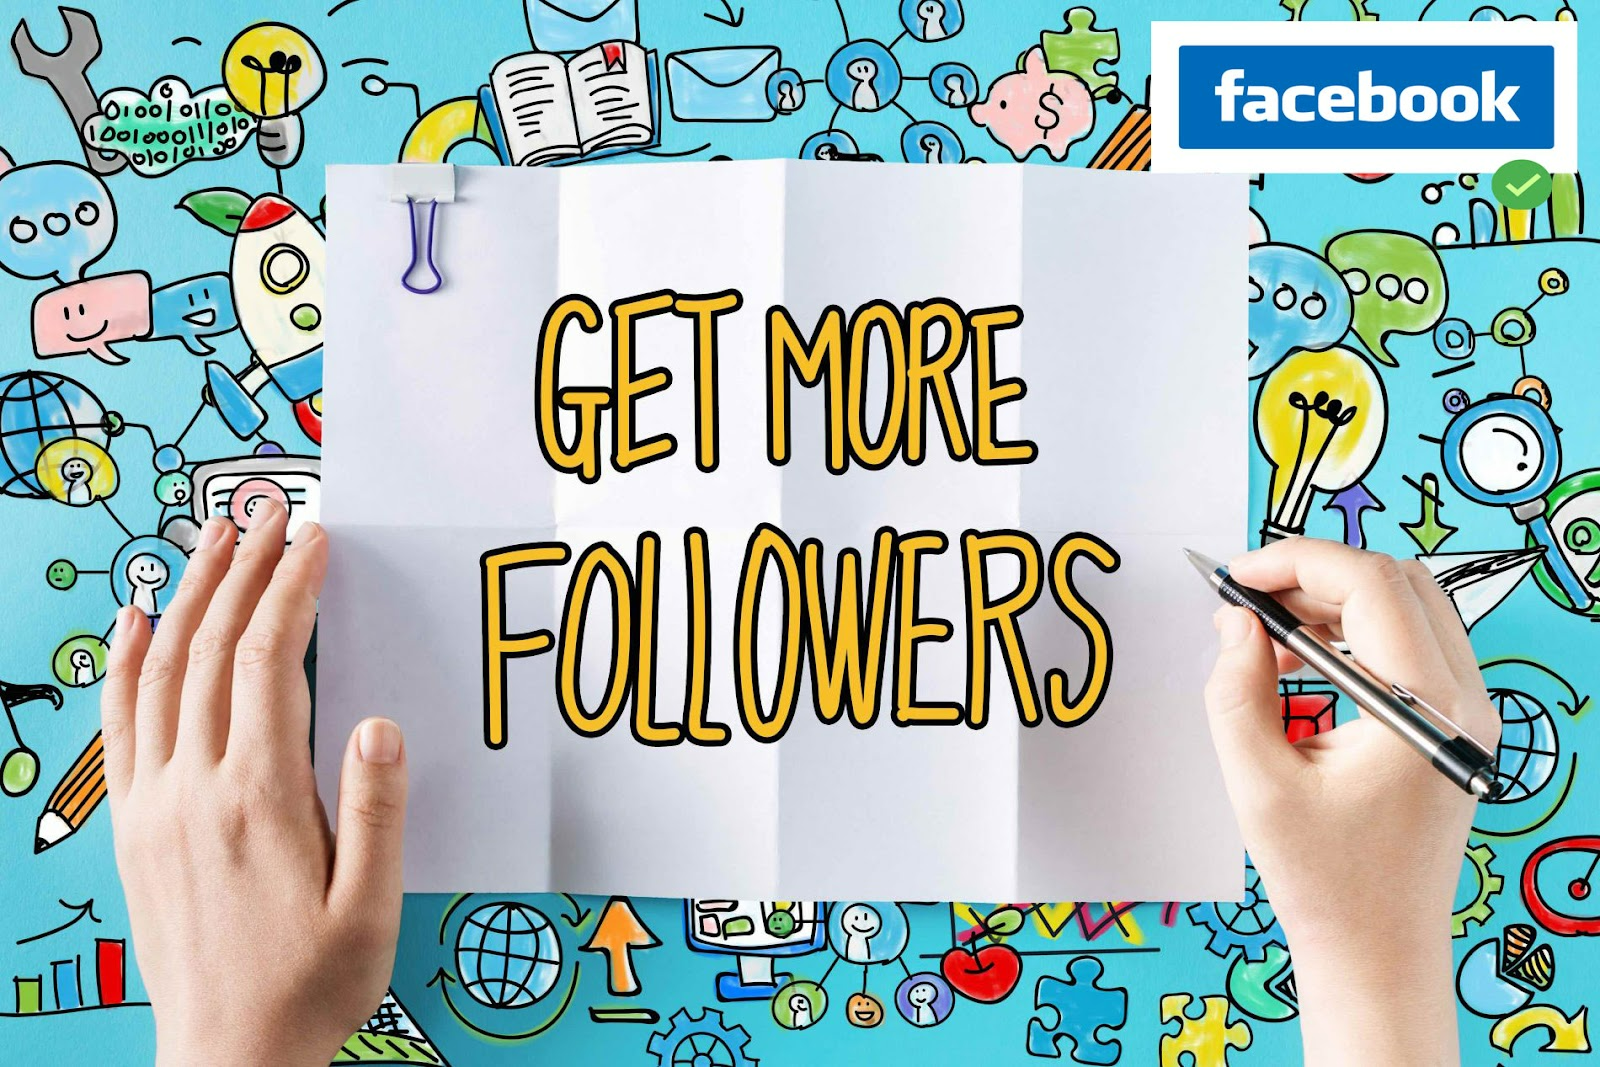 How To Increase Follower's Facebook Page?